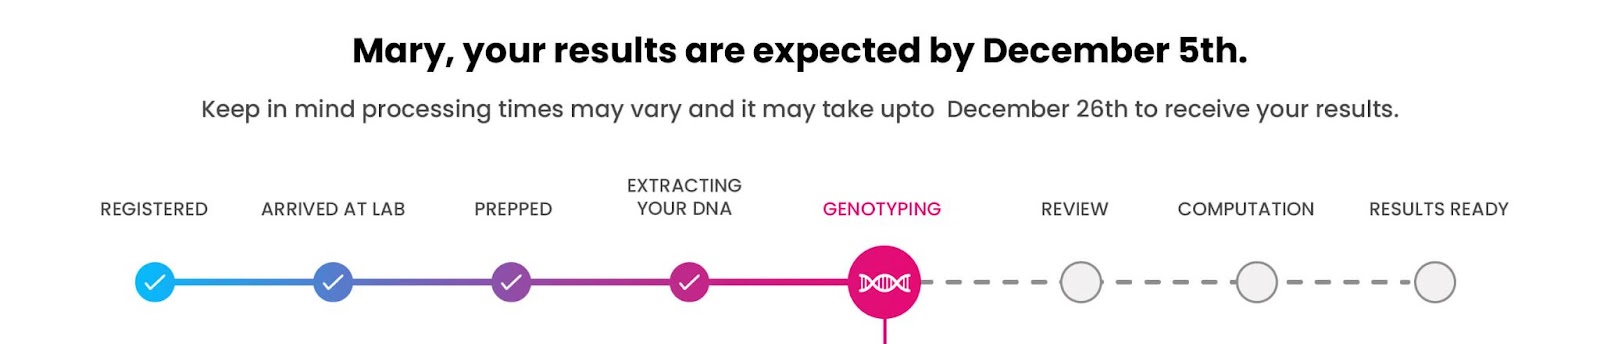 How Long Does 23andMe Take? The image shows the timeline of 23andMe process right from a user registering for a DNA kit to them receiving their results.